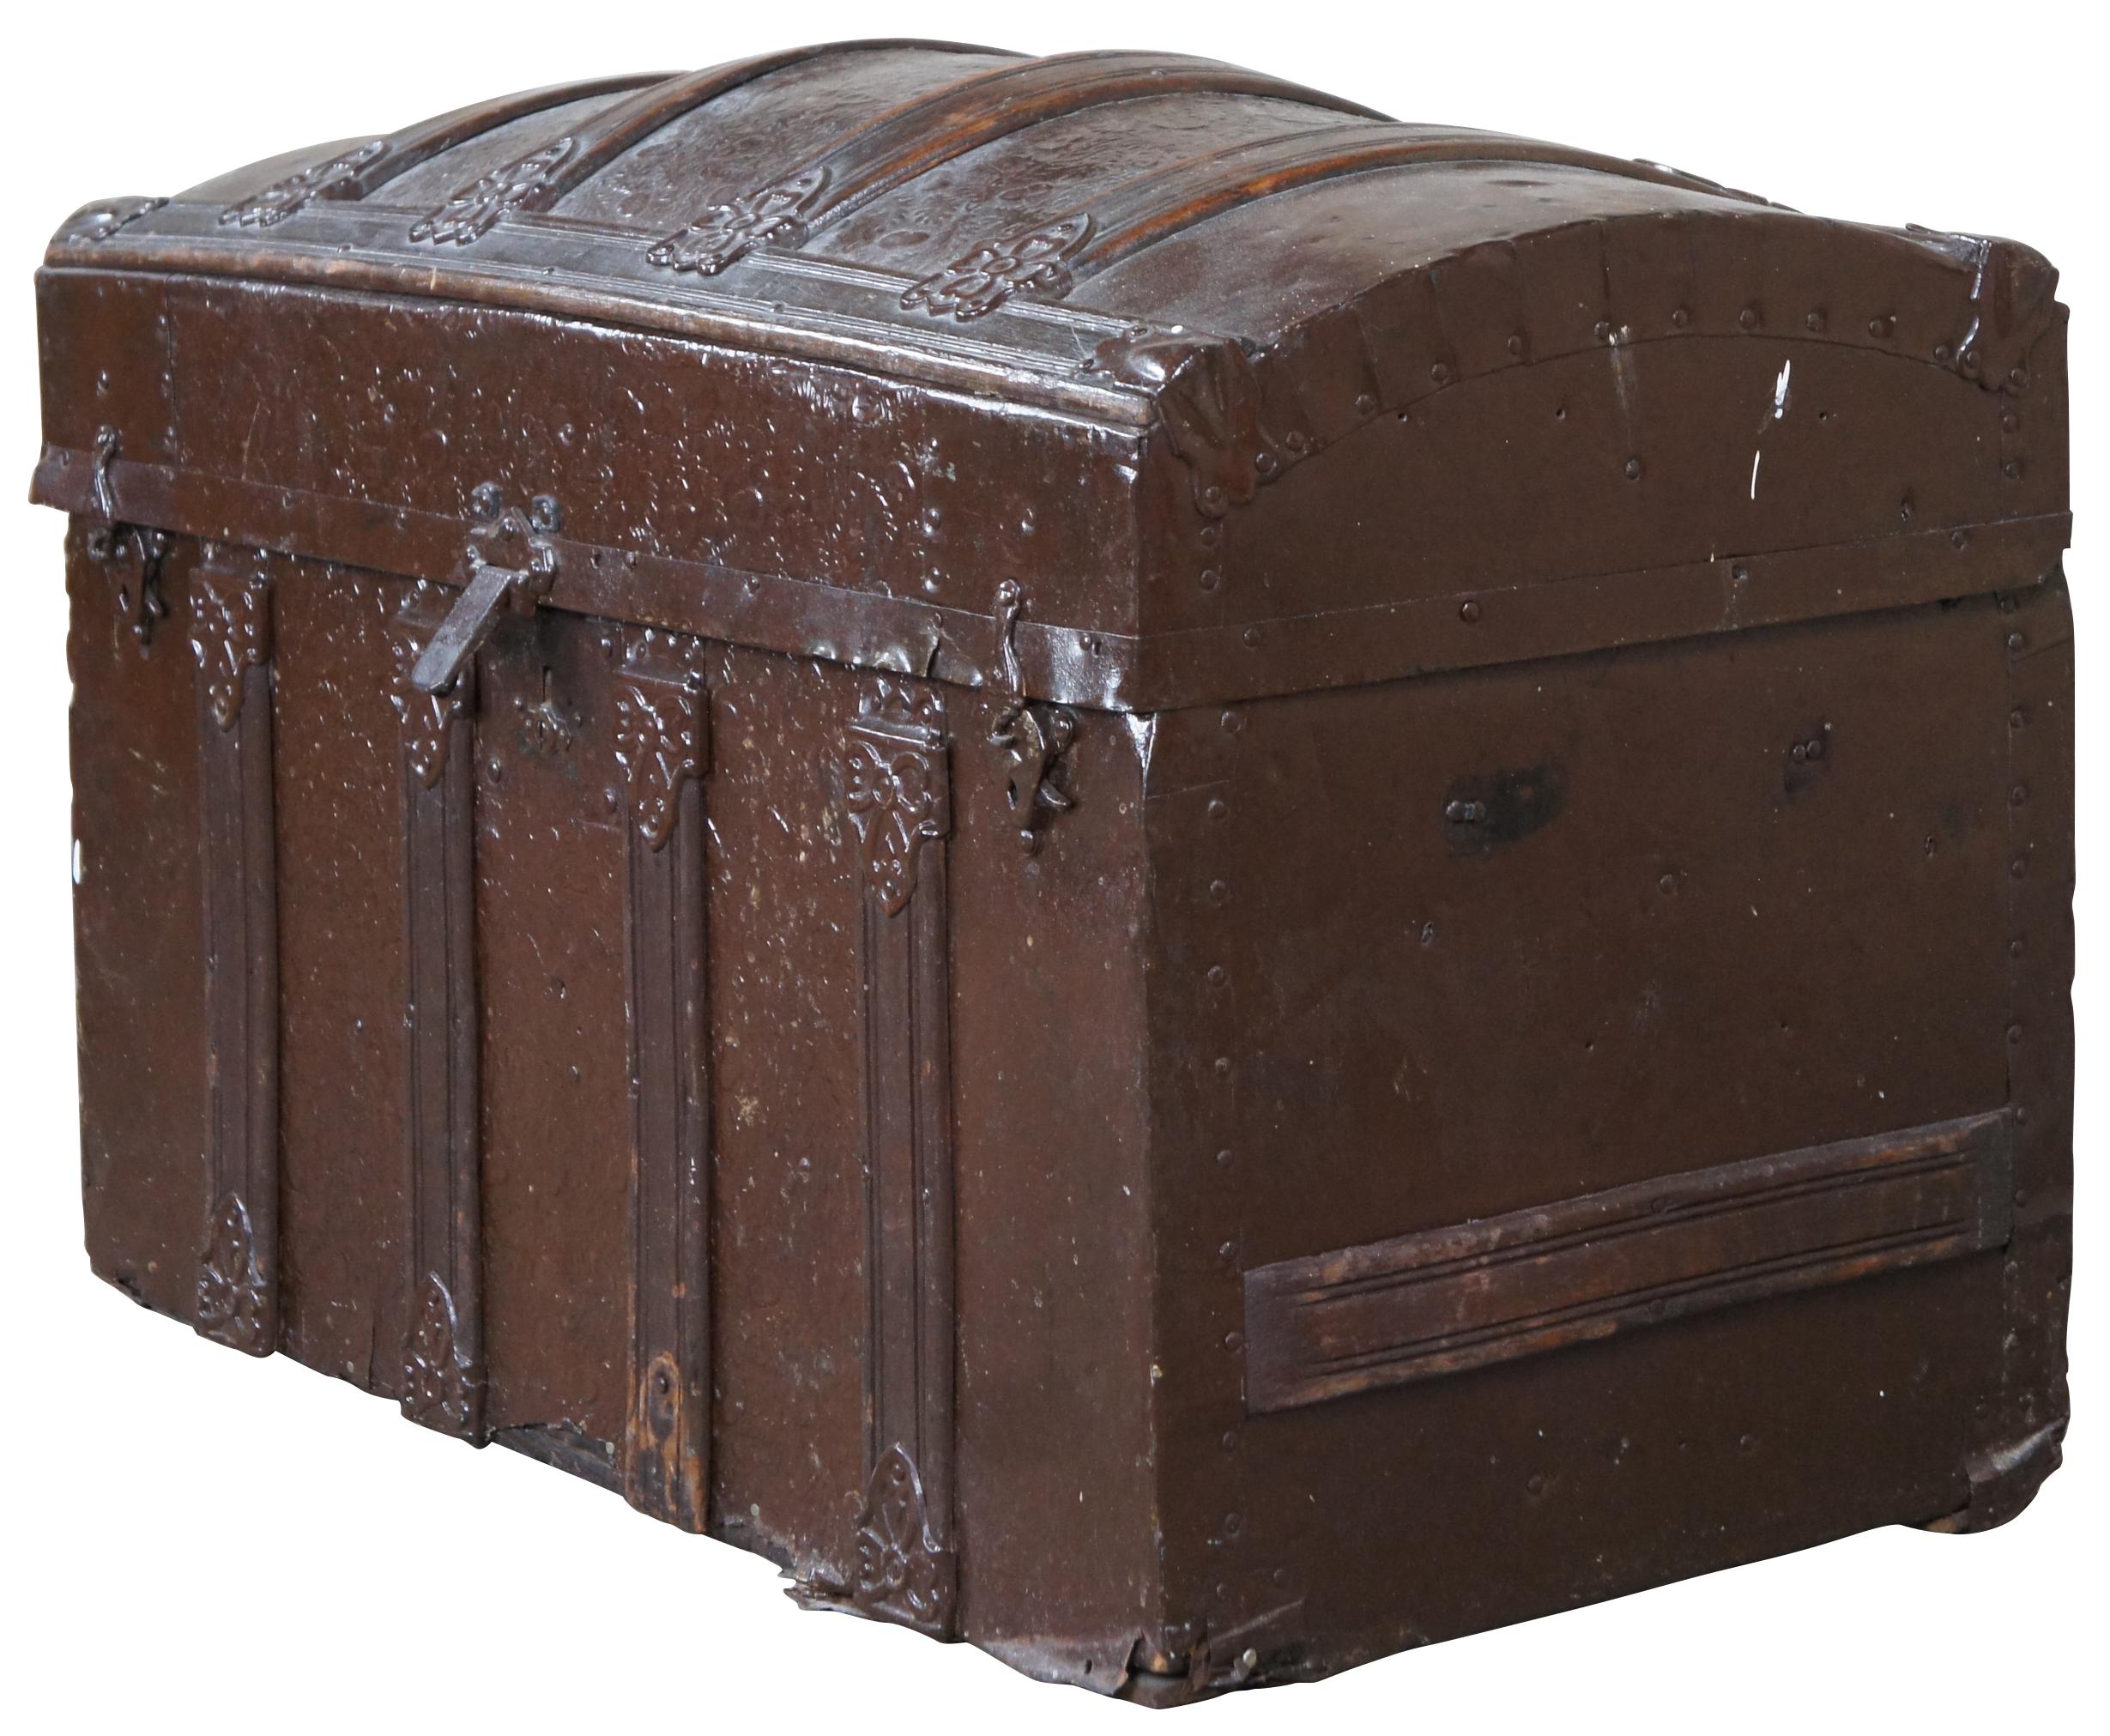 Victorian Dome top trunk. Presssed metal with banded oak top. Measure: 28